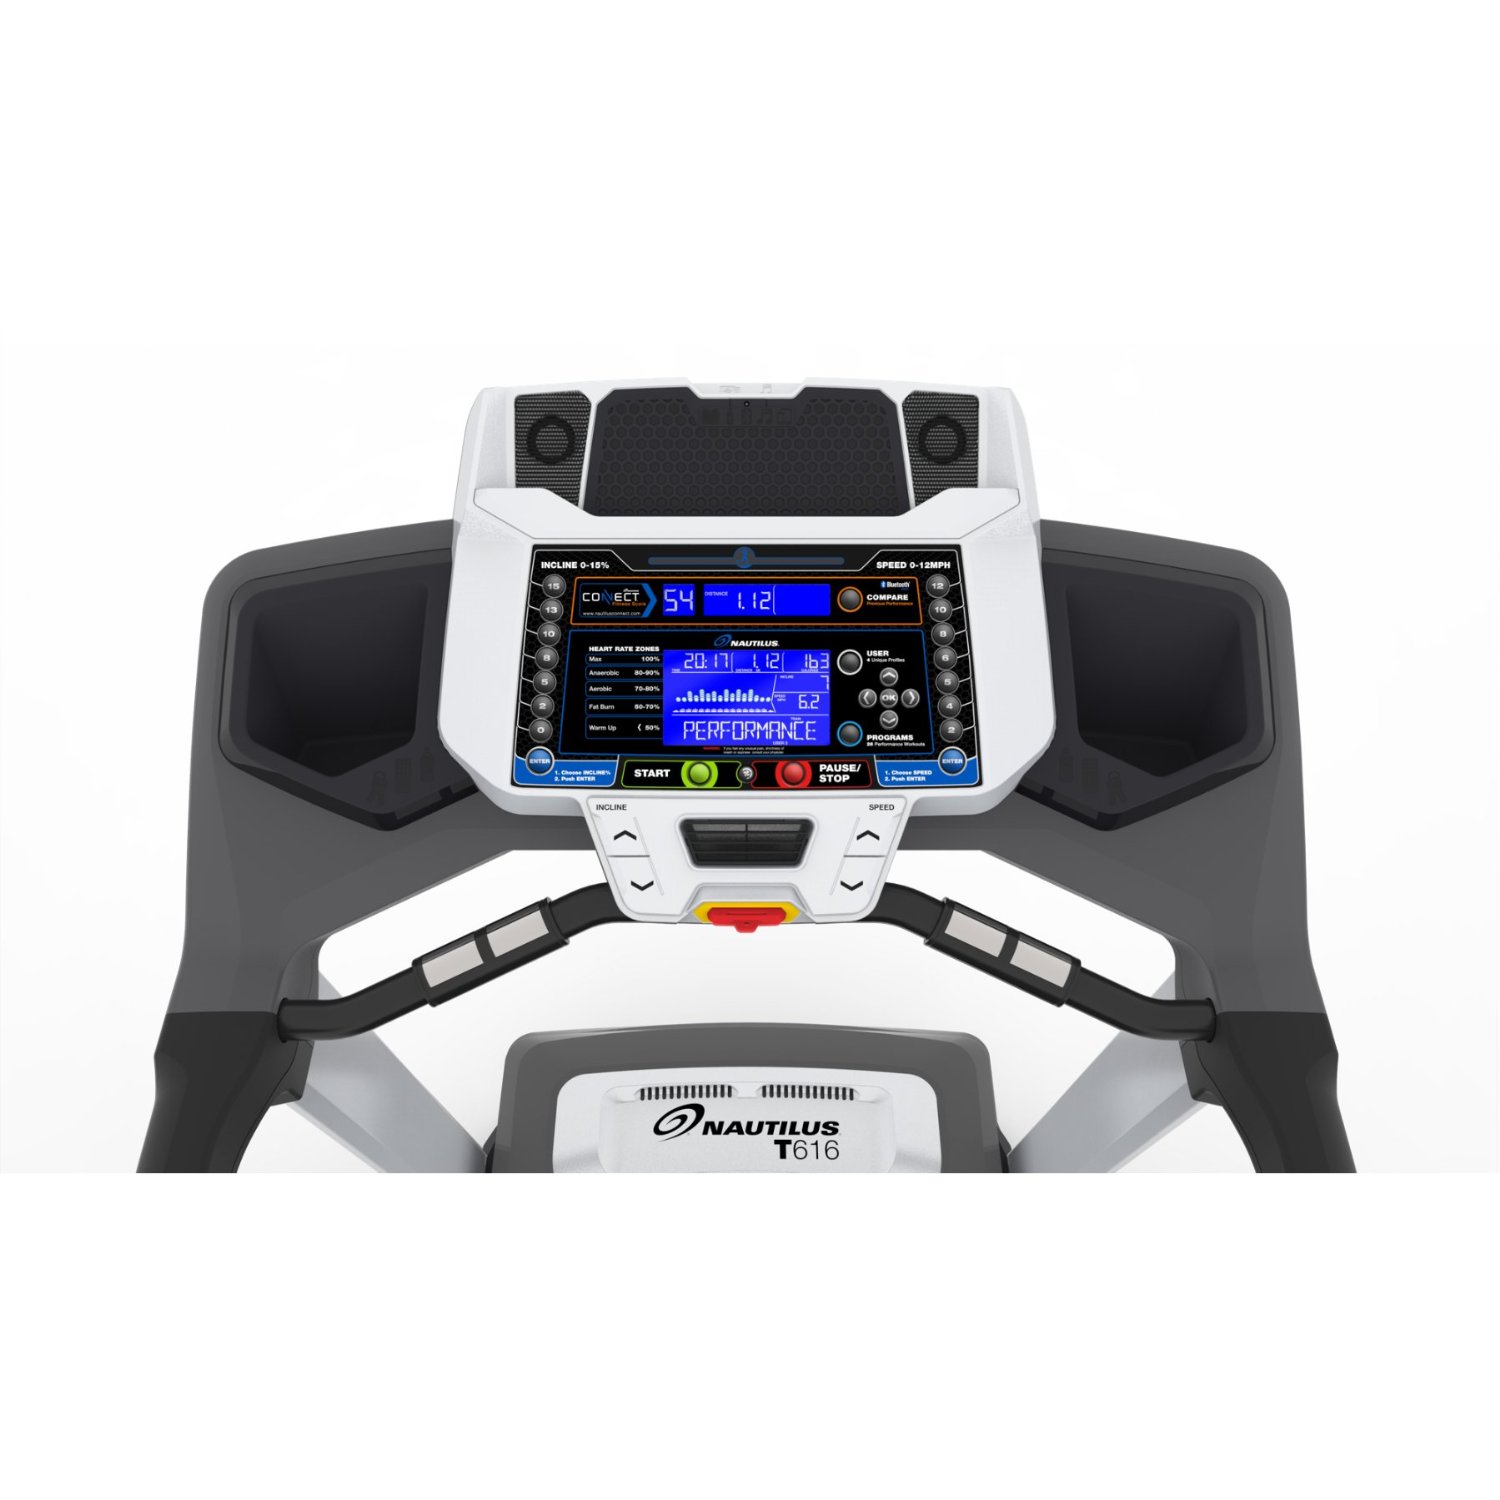 Nautilus T616 Treadmill Console and Display